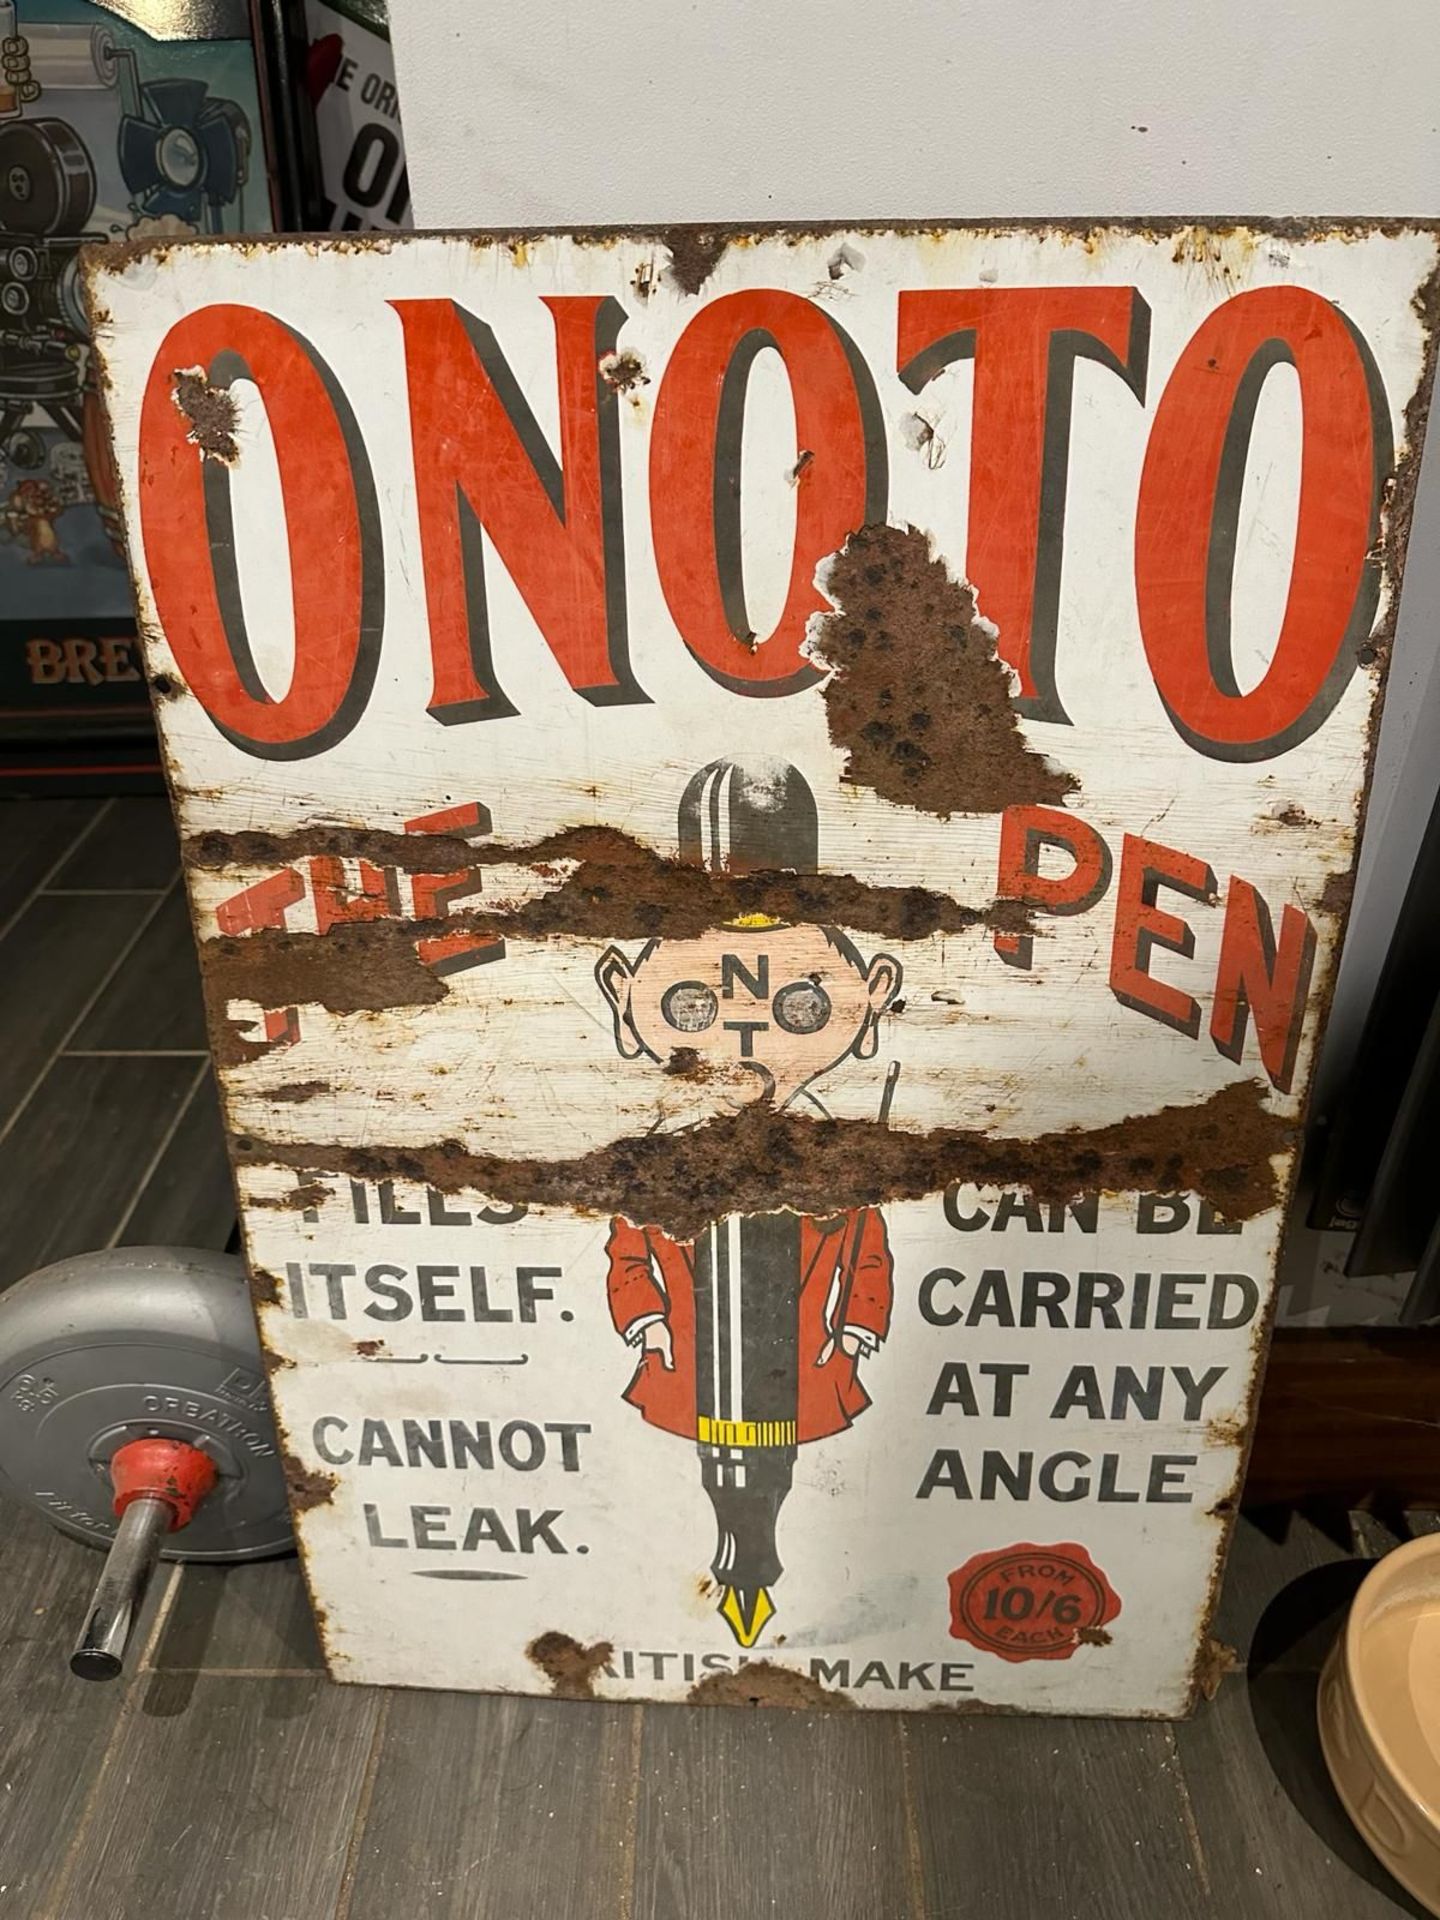 A vintage enamelled advertising sign for Onoto 'The Pen', approx 50 x 76cm (19 x 30").